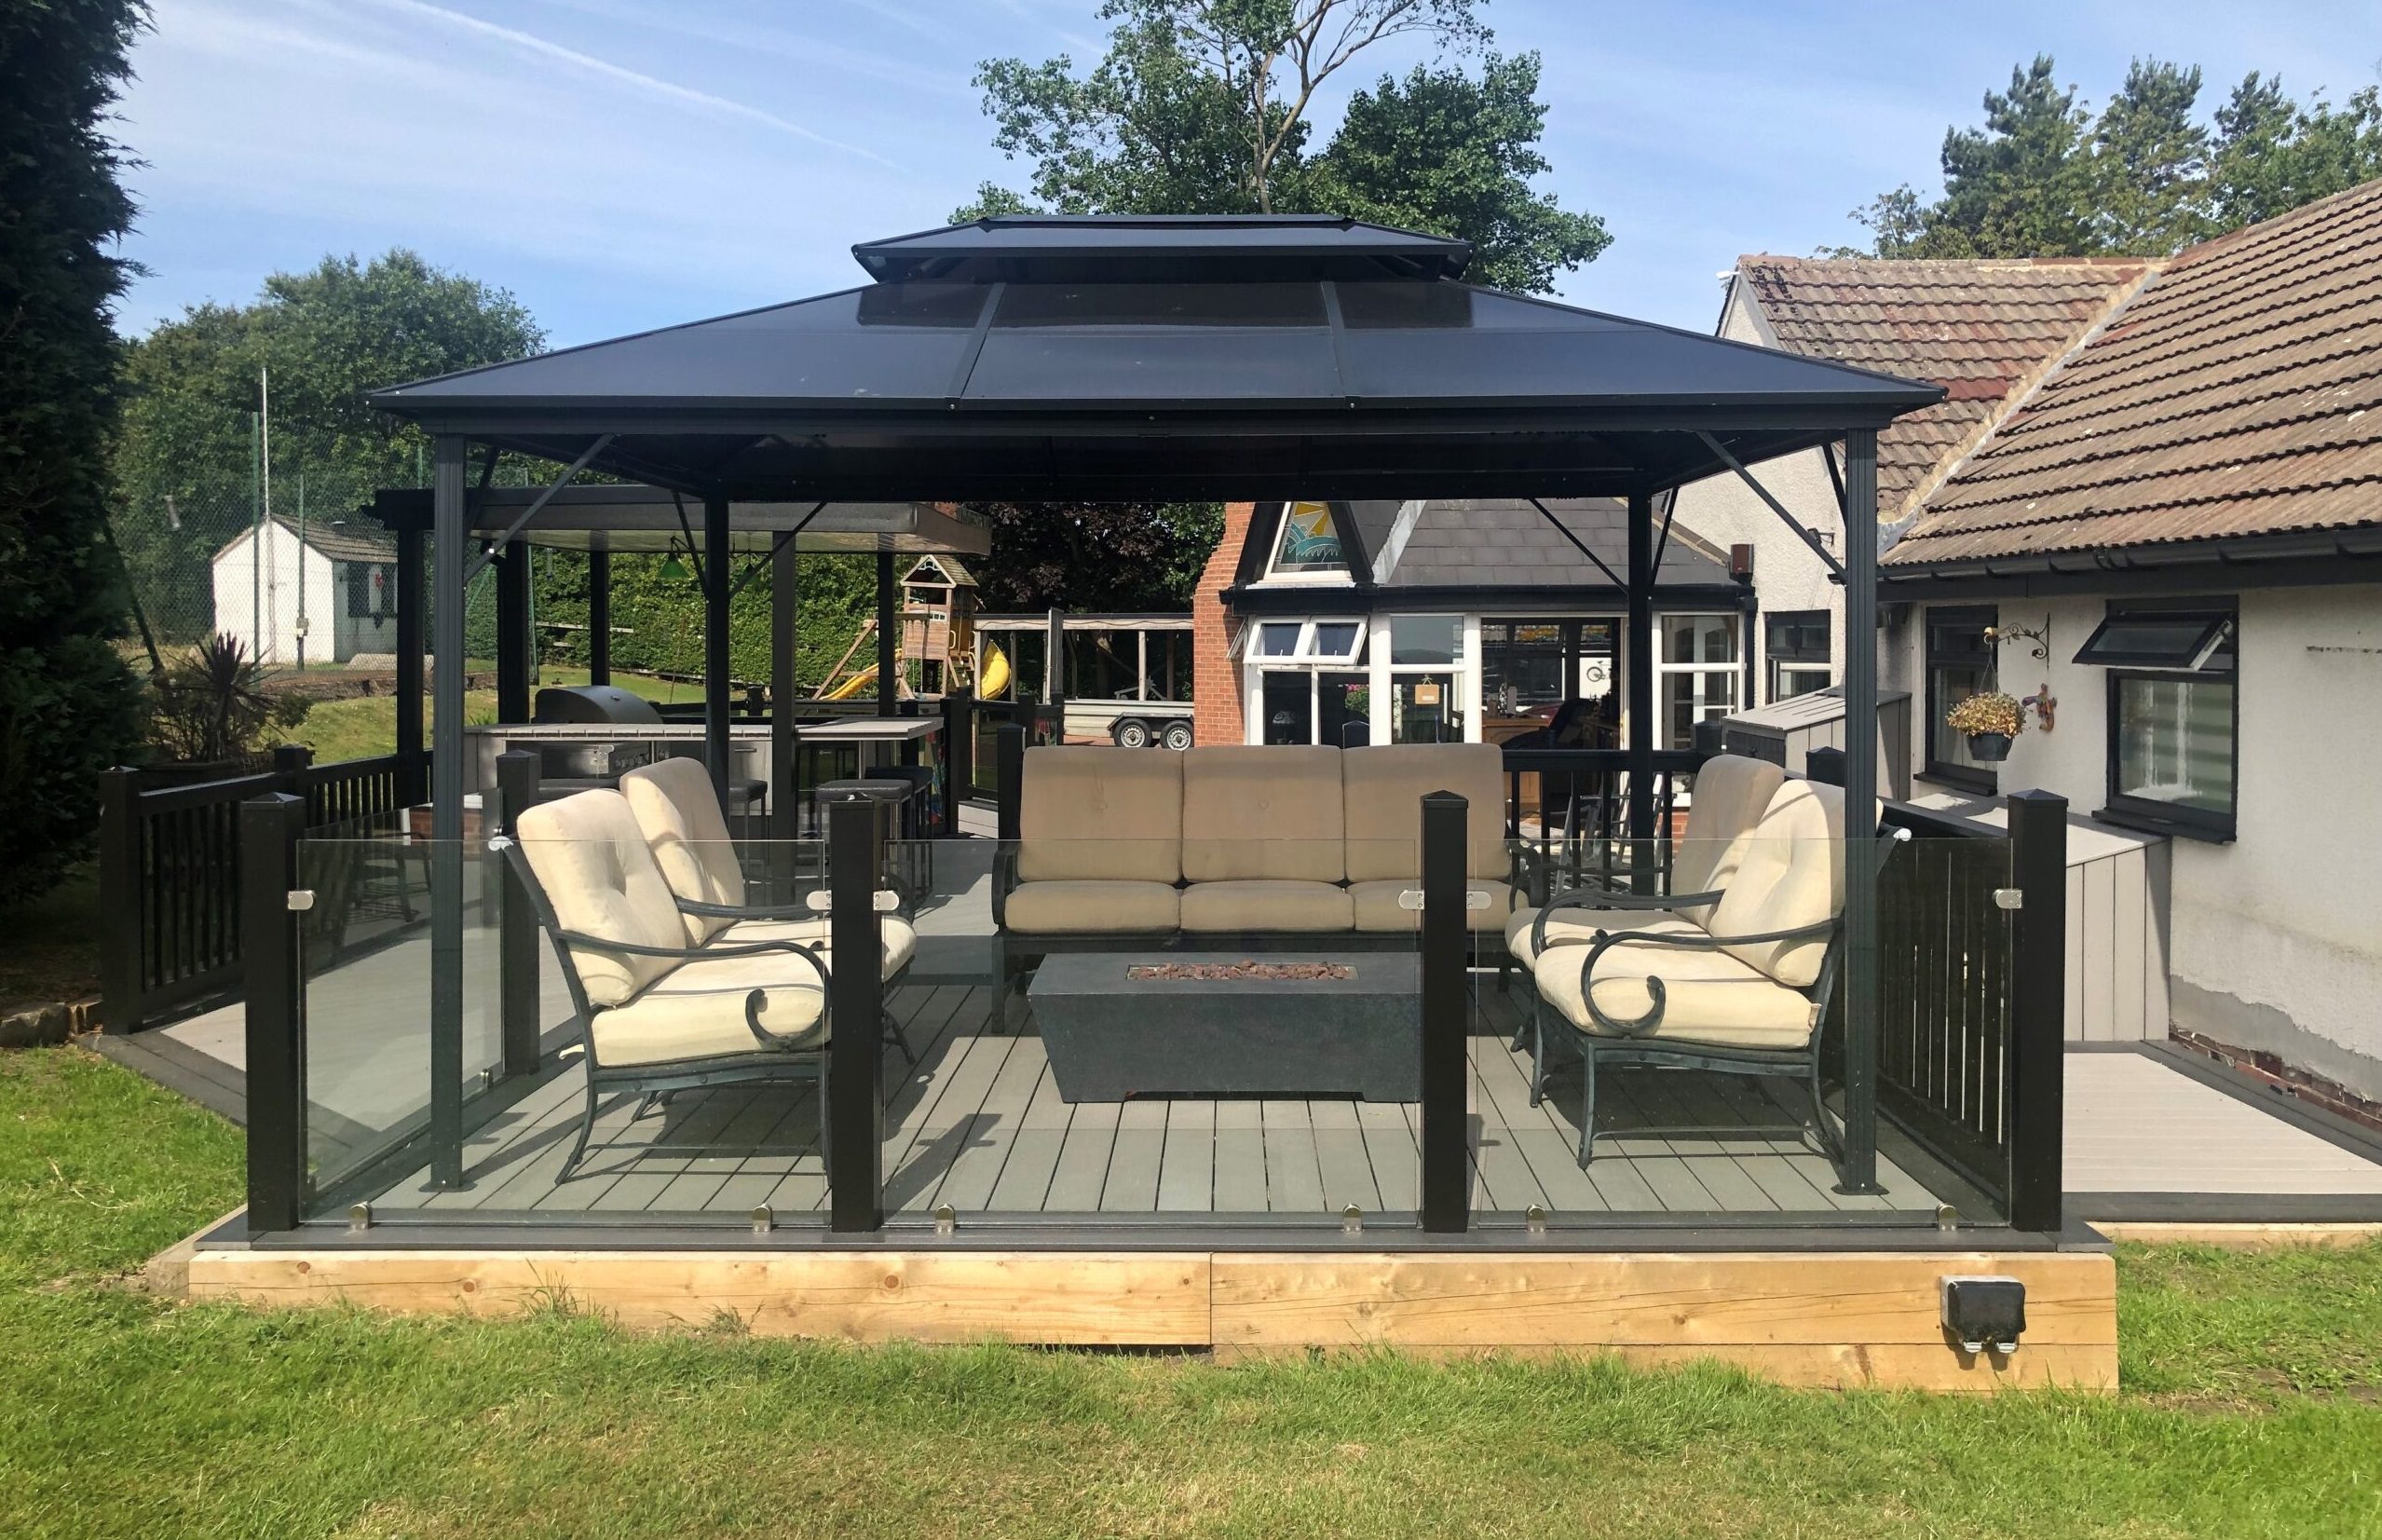 Outdoor seating area with composite decking